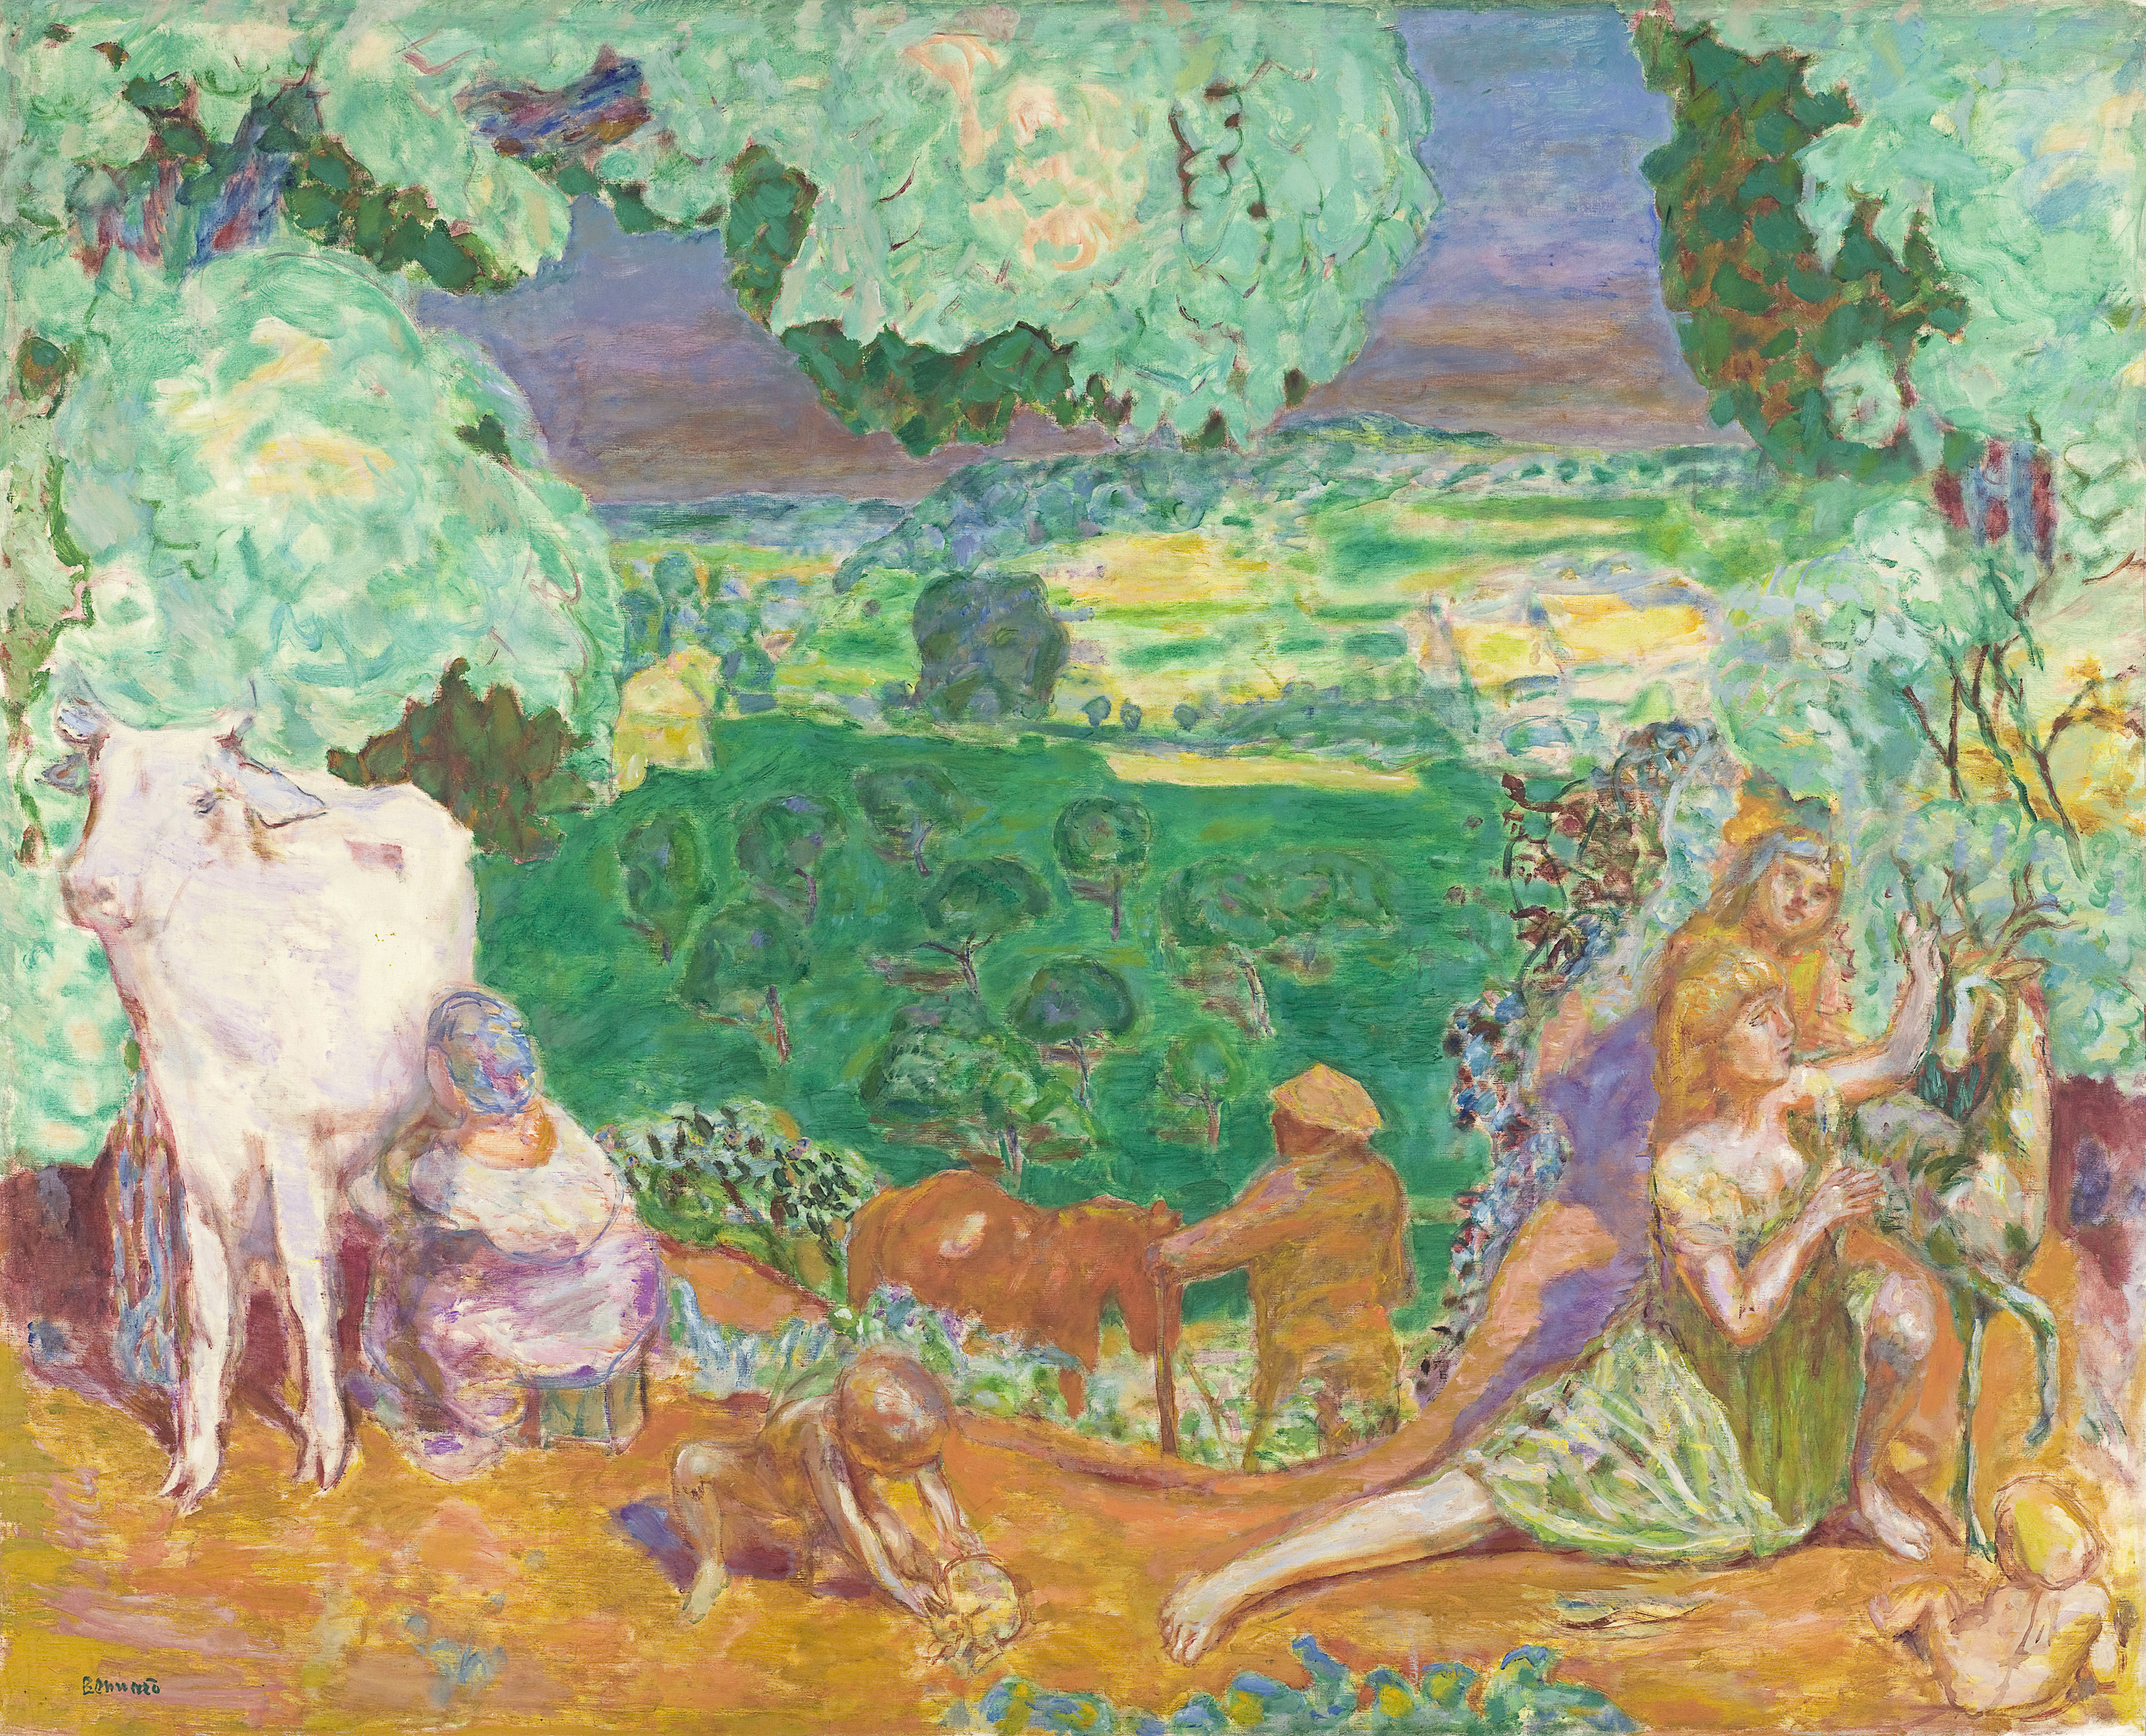 Oil painting of a pastoral, mythological scene with cow and nymphs, in bright colours.